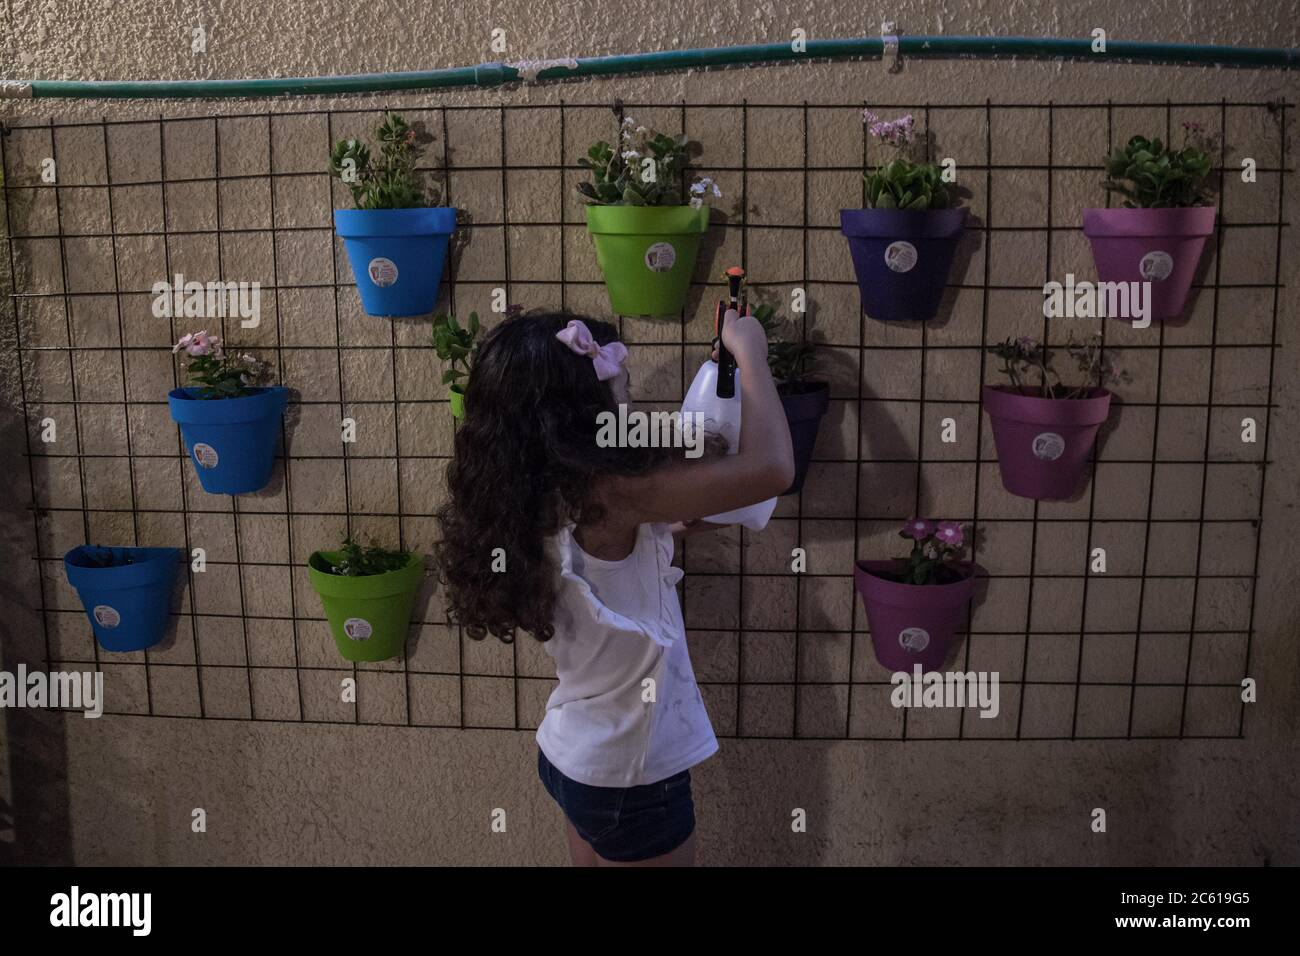 18 June 2020, Egypt, Cairo: Layan waters the plants which her mother hanged on the wall at their house backyard. For more than three months schools, sports clubs, amusement parks and gardens have been closed due to the coronavirus pandemic. The majority of children suddenly got stuck at home where they are trying to come up with activities to kill their time, however, they still have hopes that soon enough they can spend their leisure time in open spaces instead of home confinement. Photo: Lobna Tarek/dpa Stock Photo